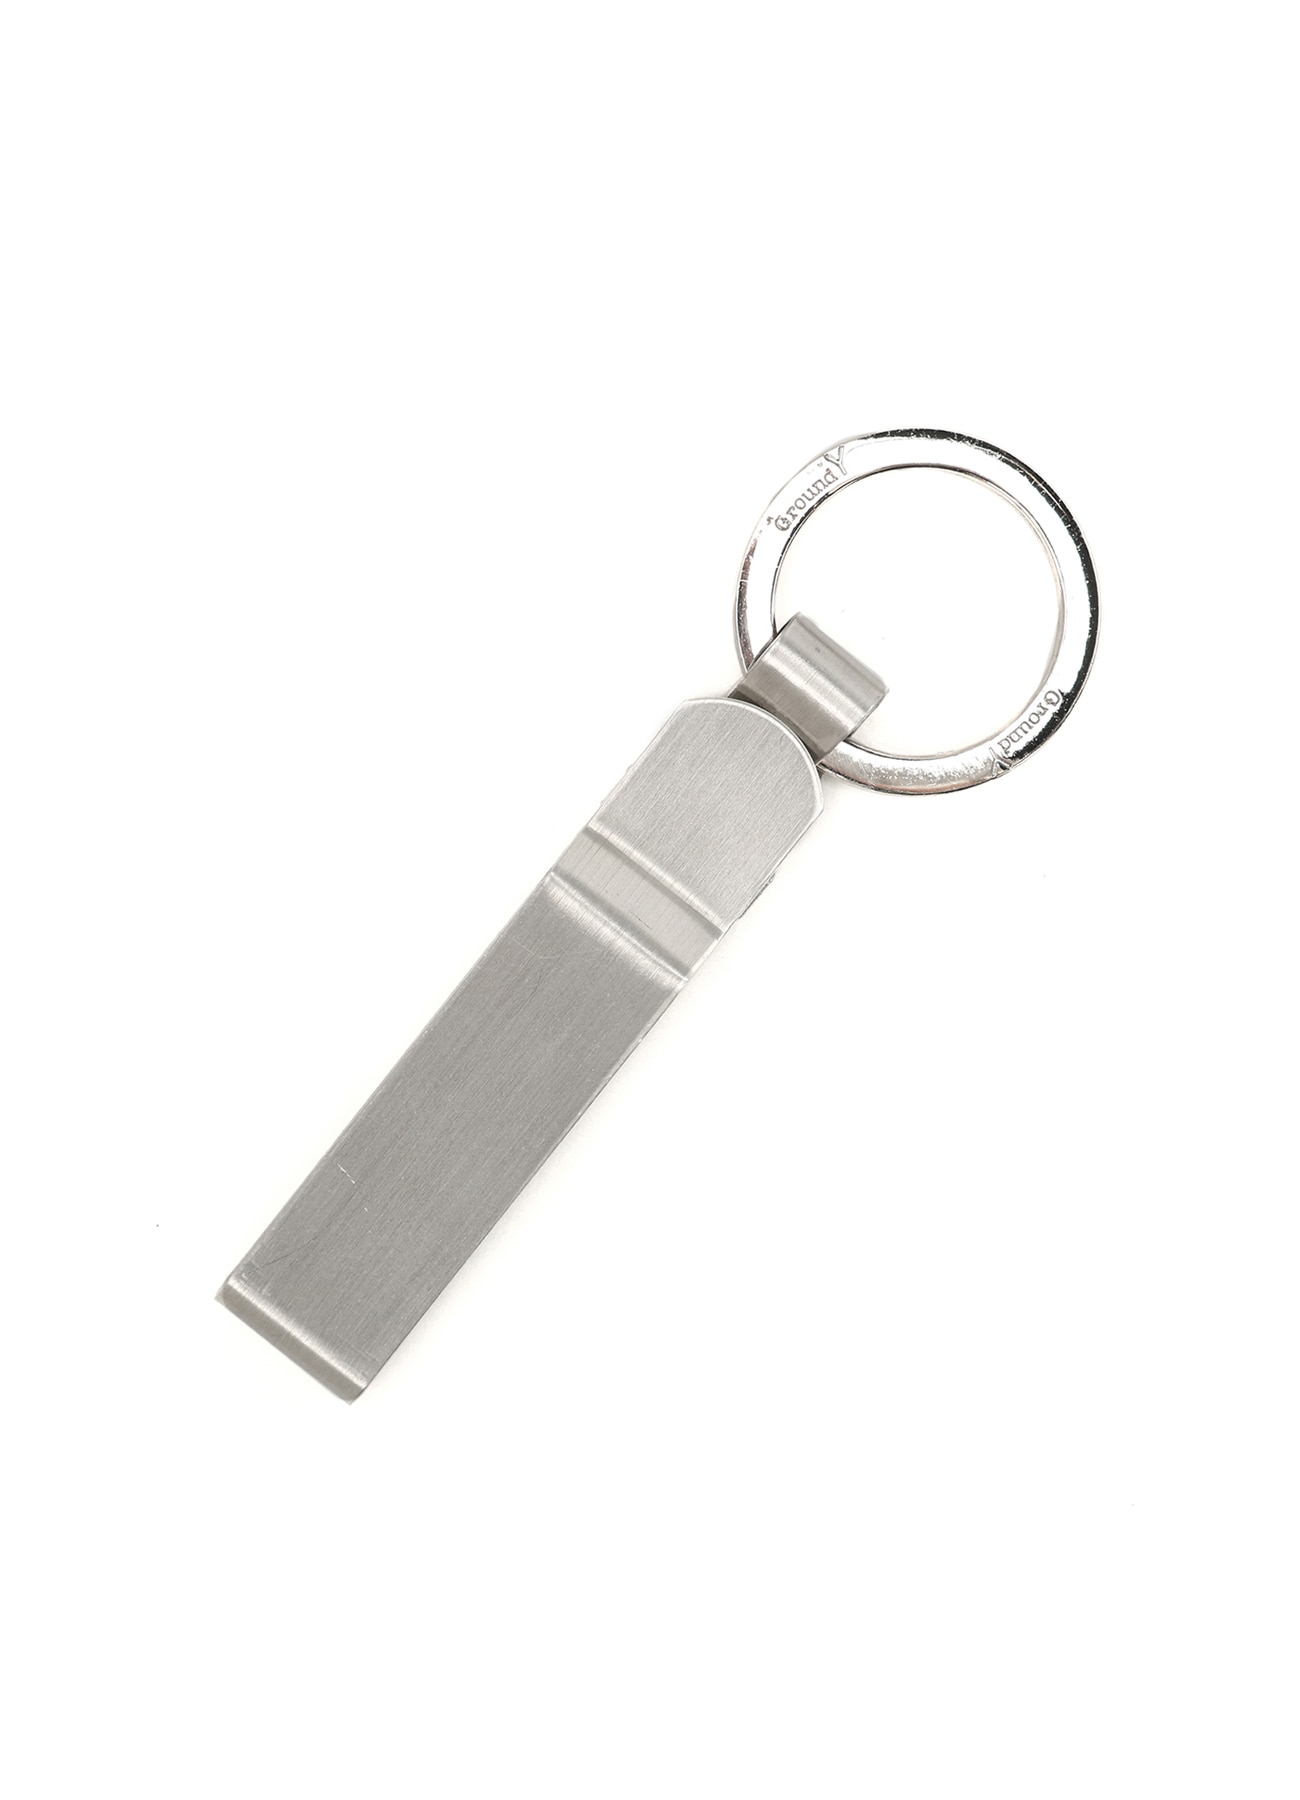 STAINLESS STEEL KEY CLIP